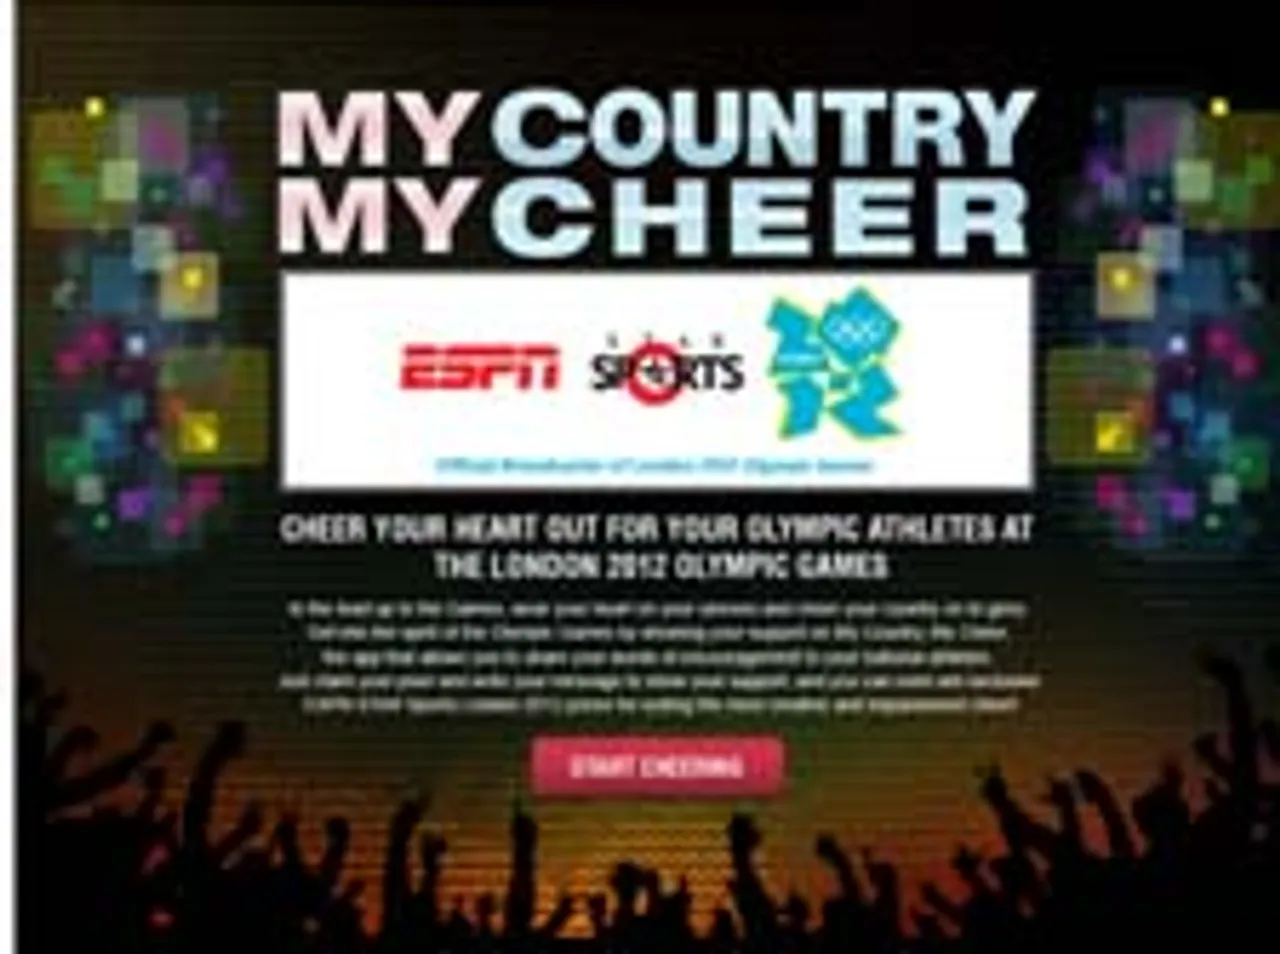 ESPN Star Sports launches 'My Country, My Cheer' Facebook app